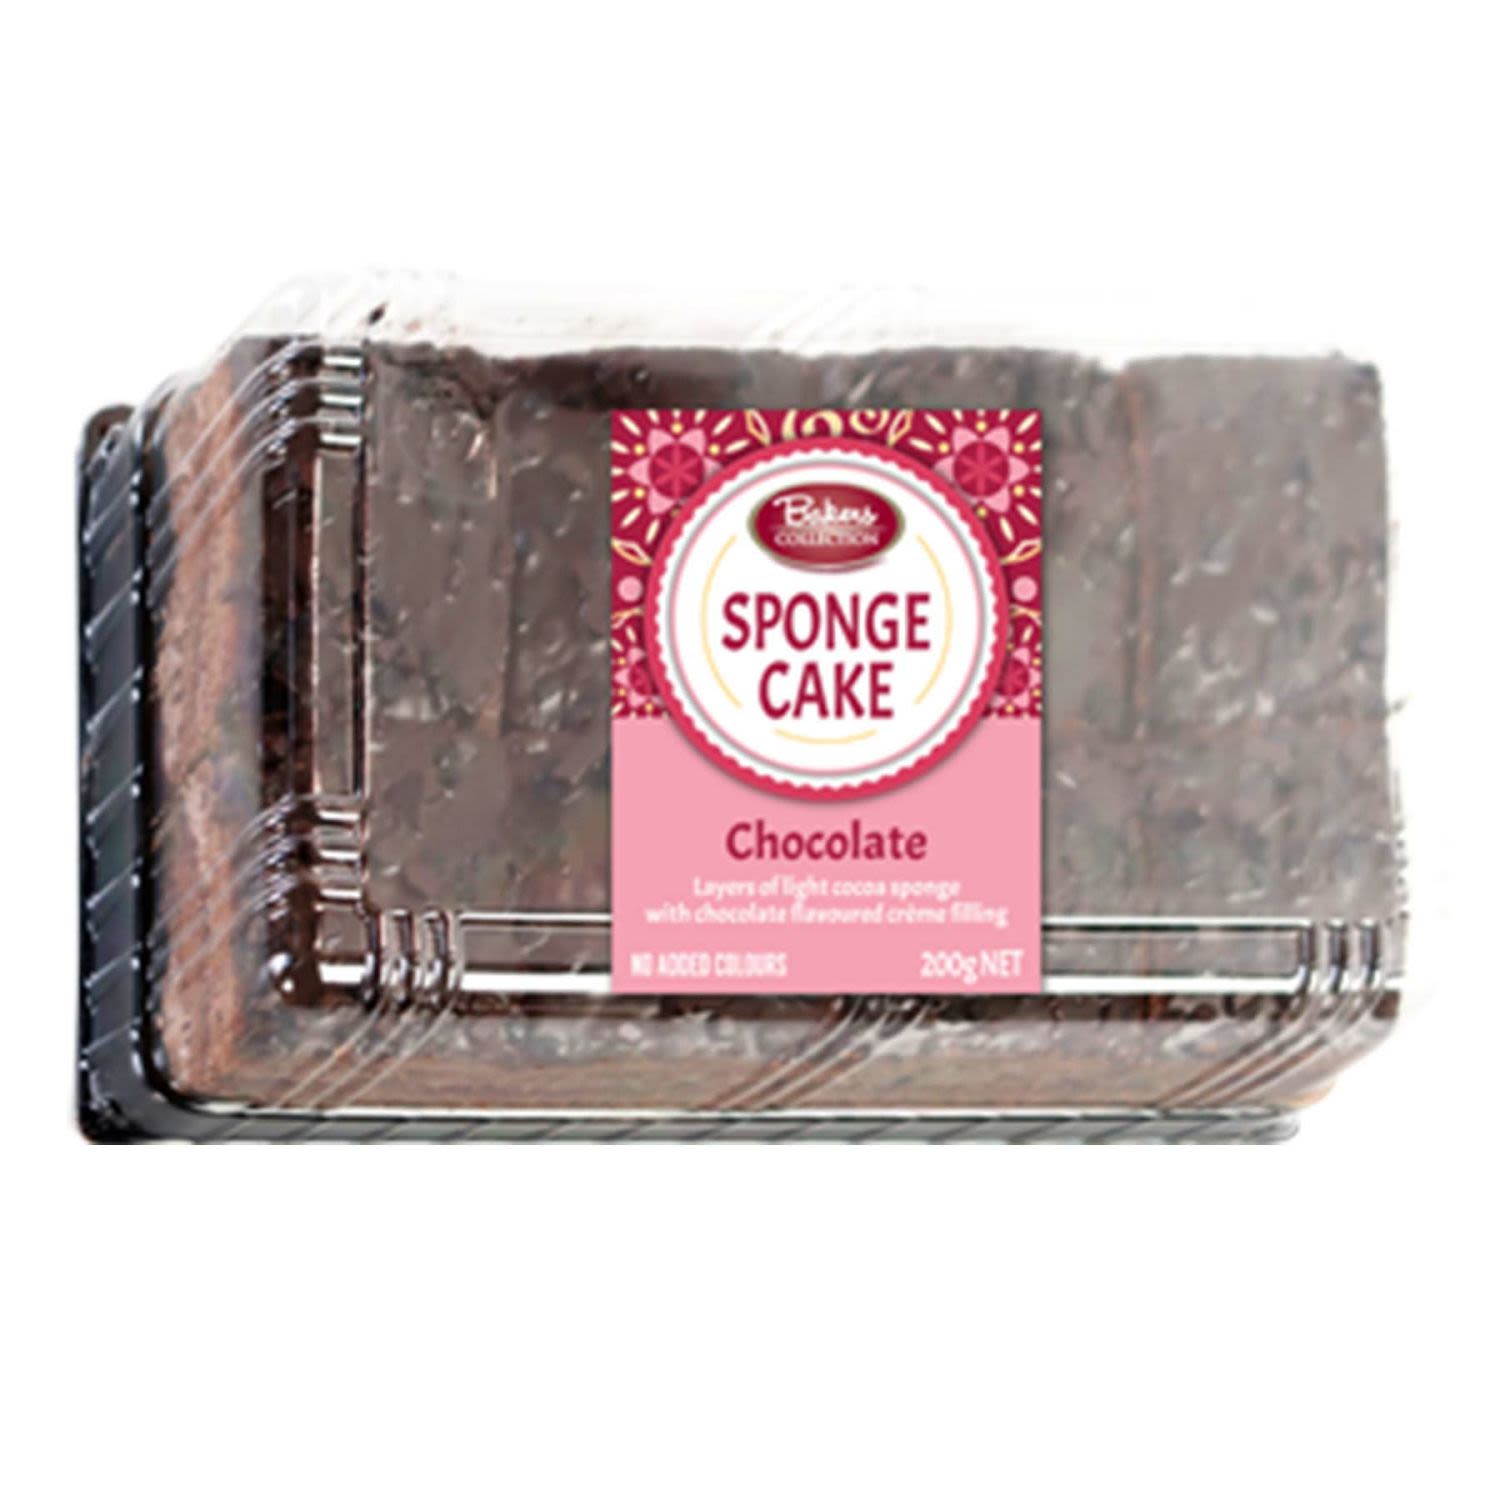  Bakers Collection Chocolate Sponge Cake, 200 Gram